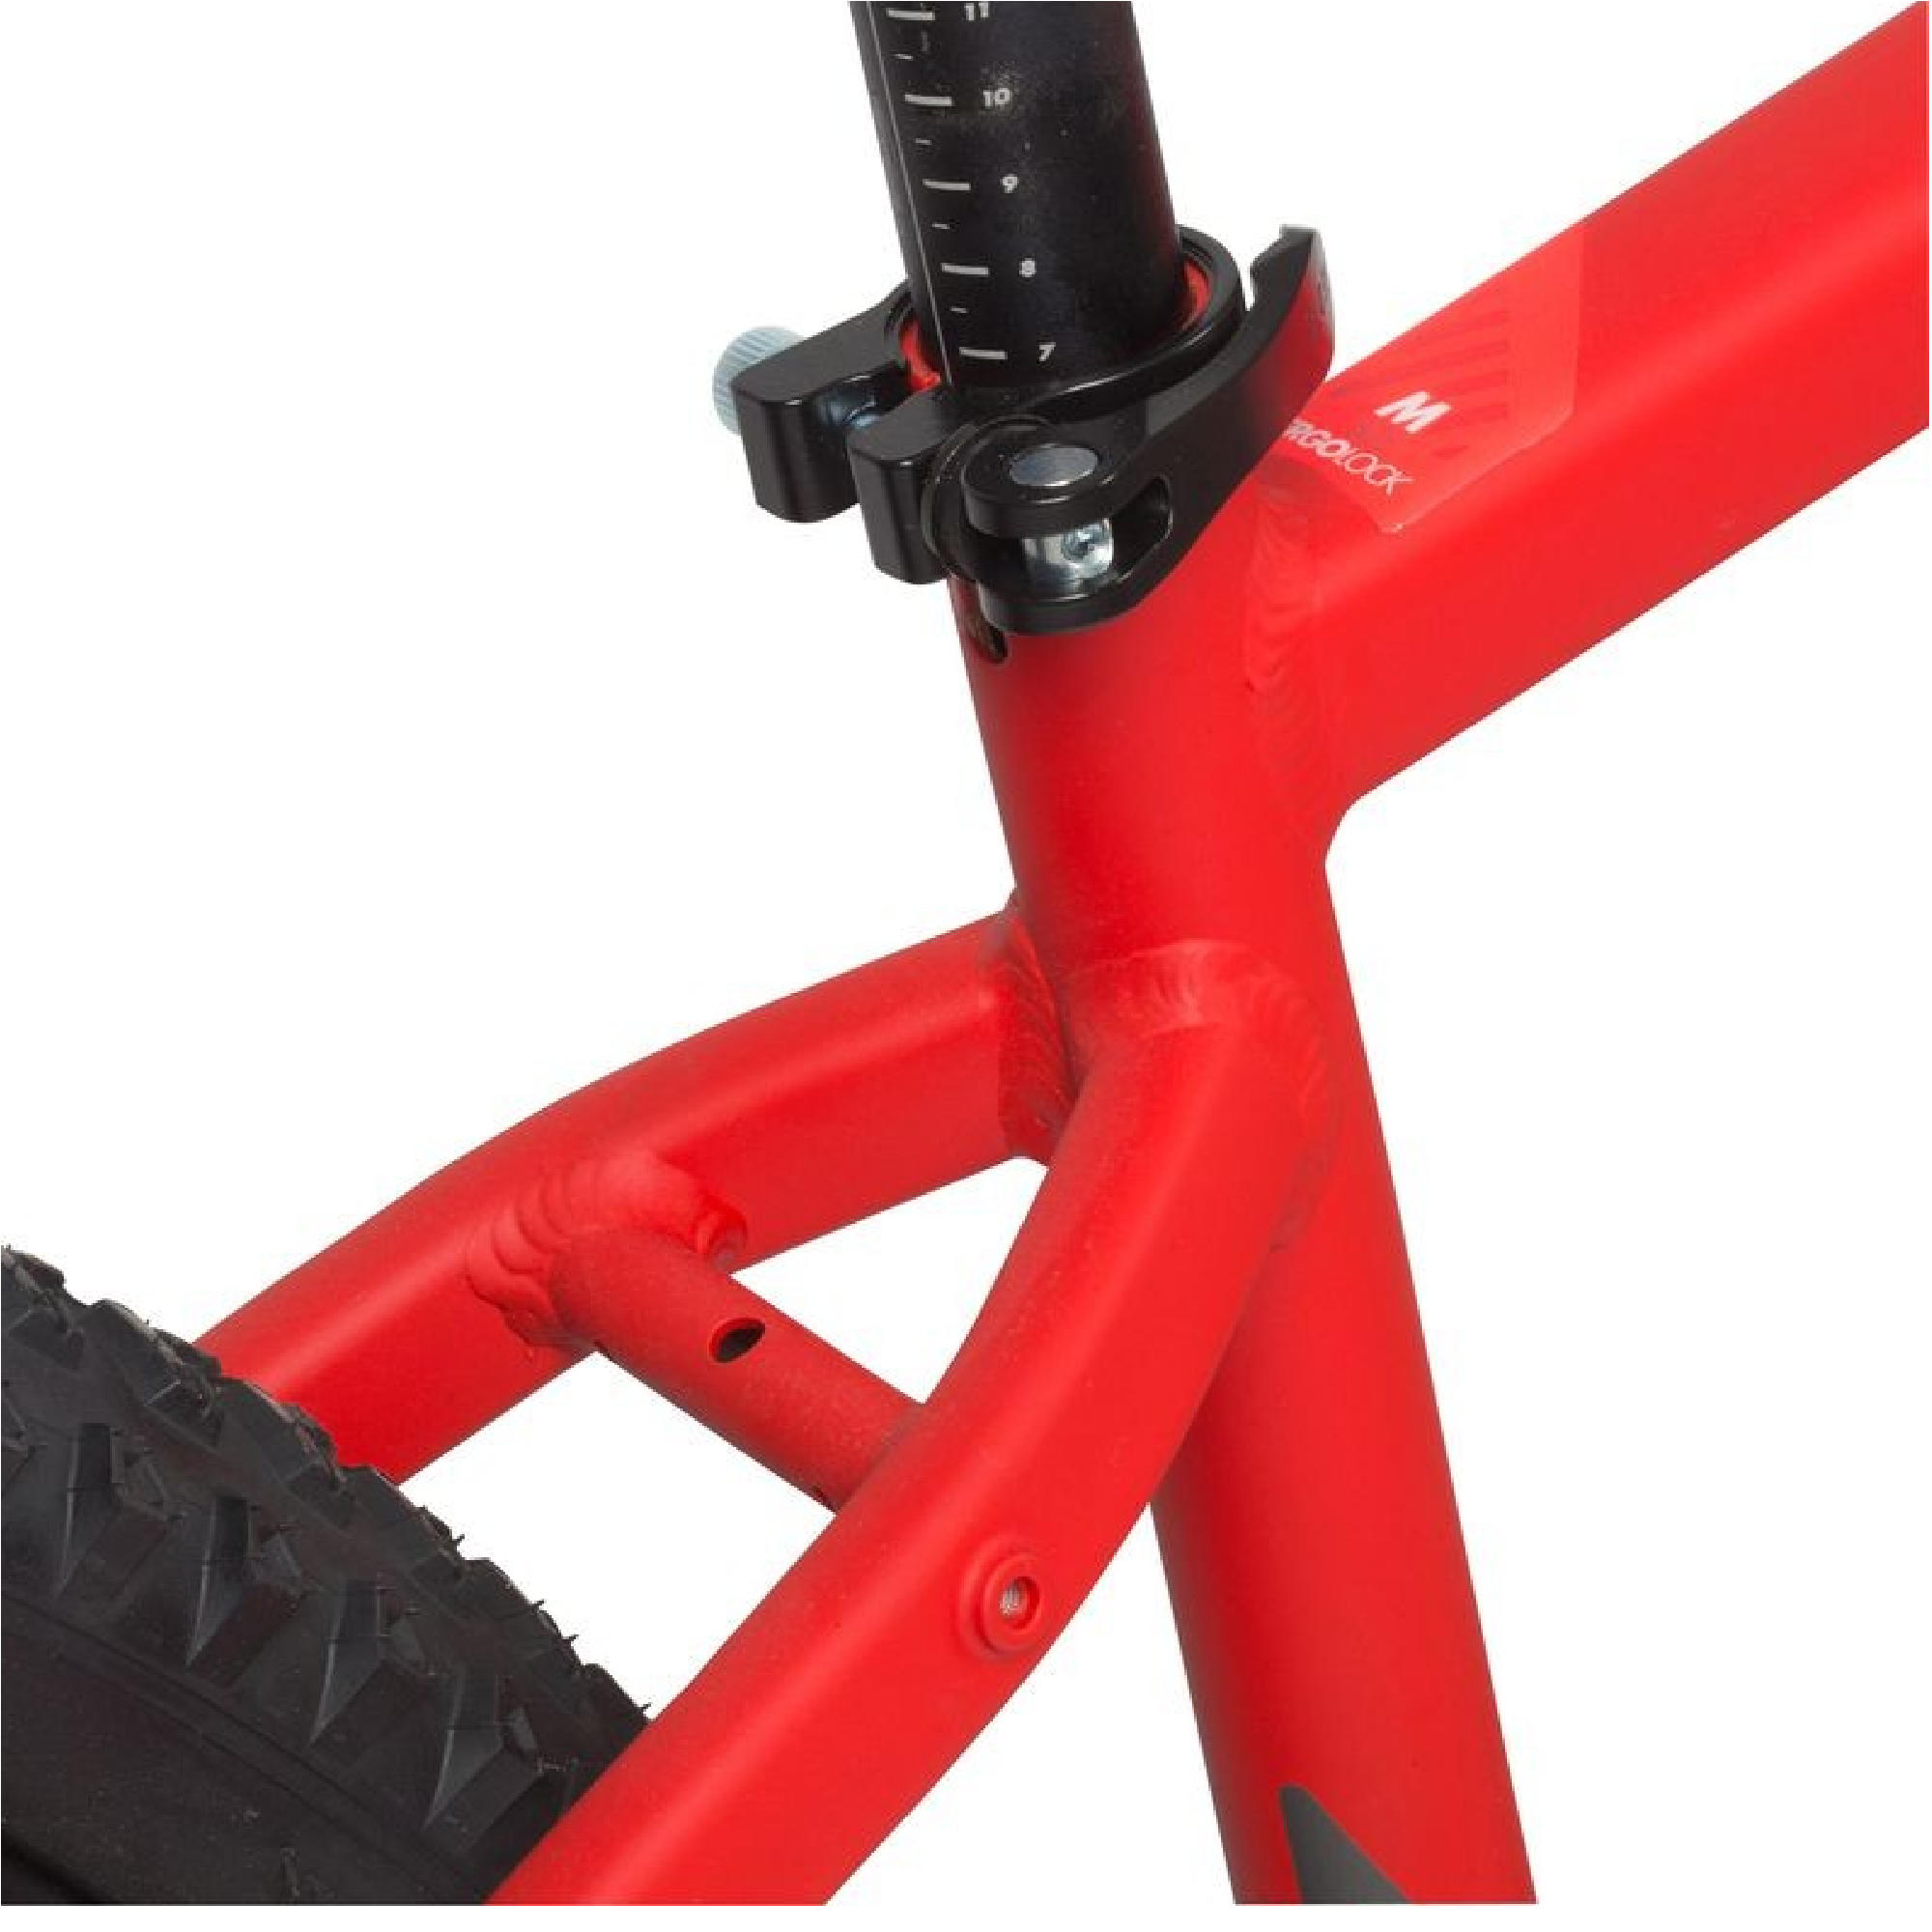 btwin 540 red